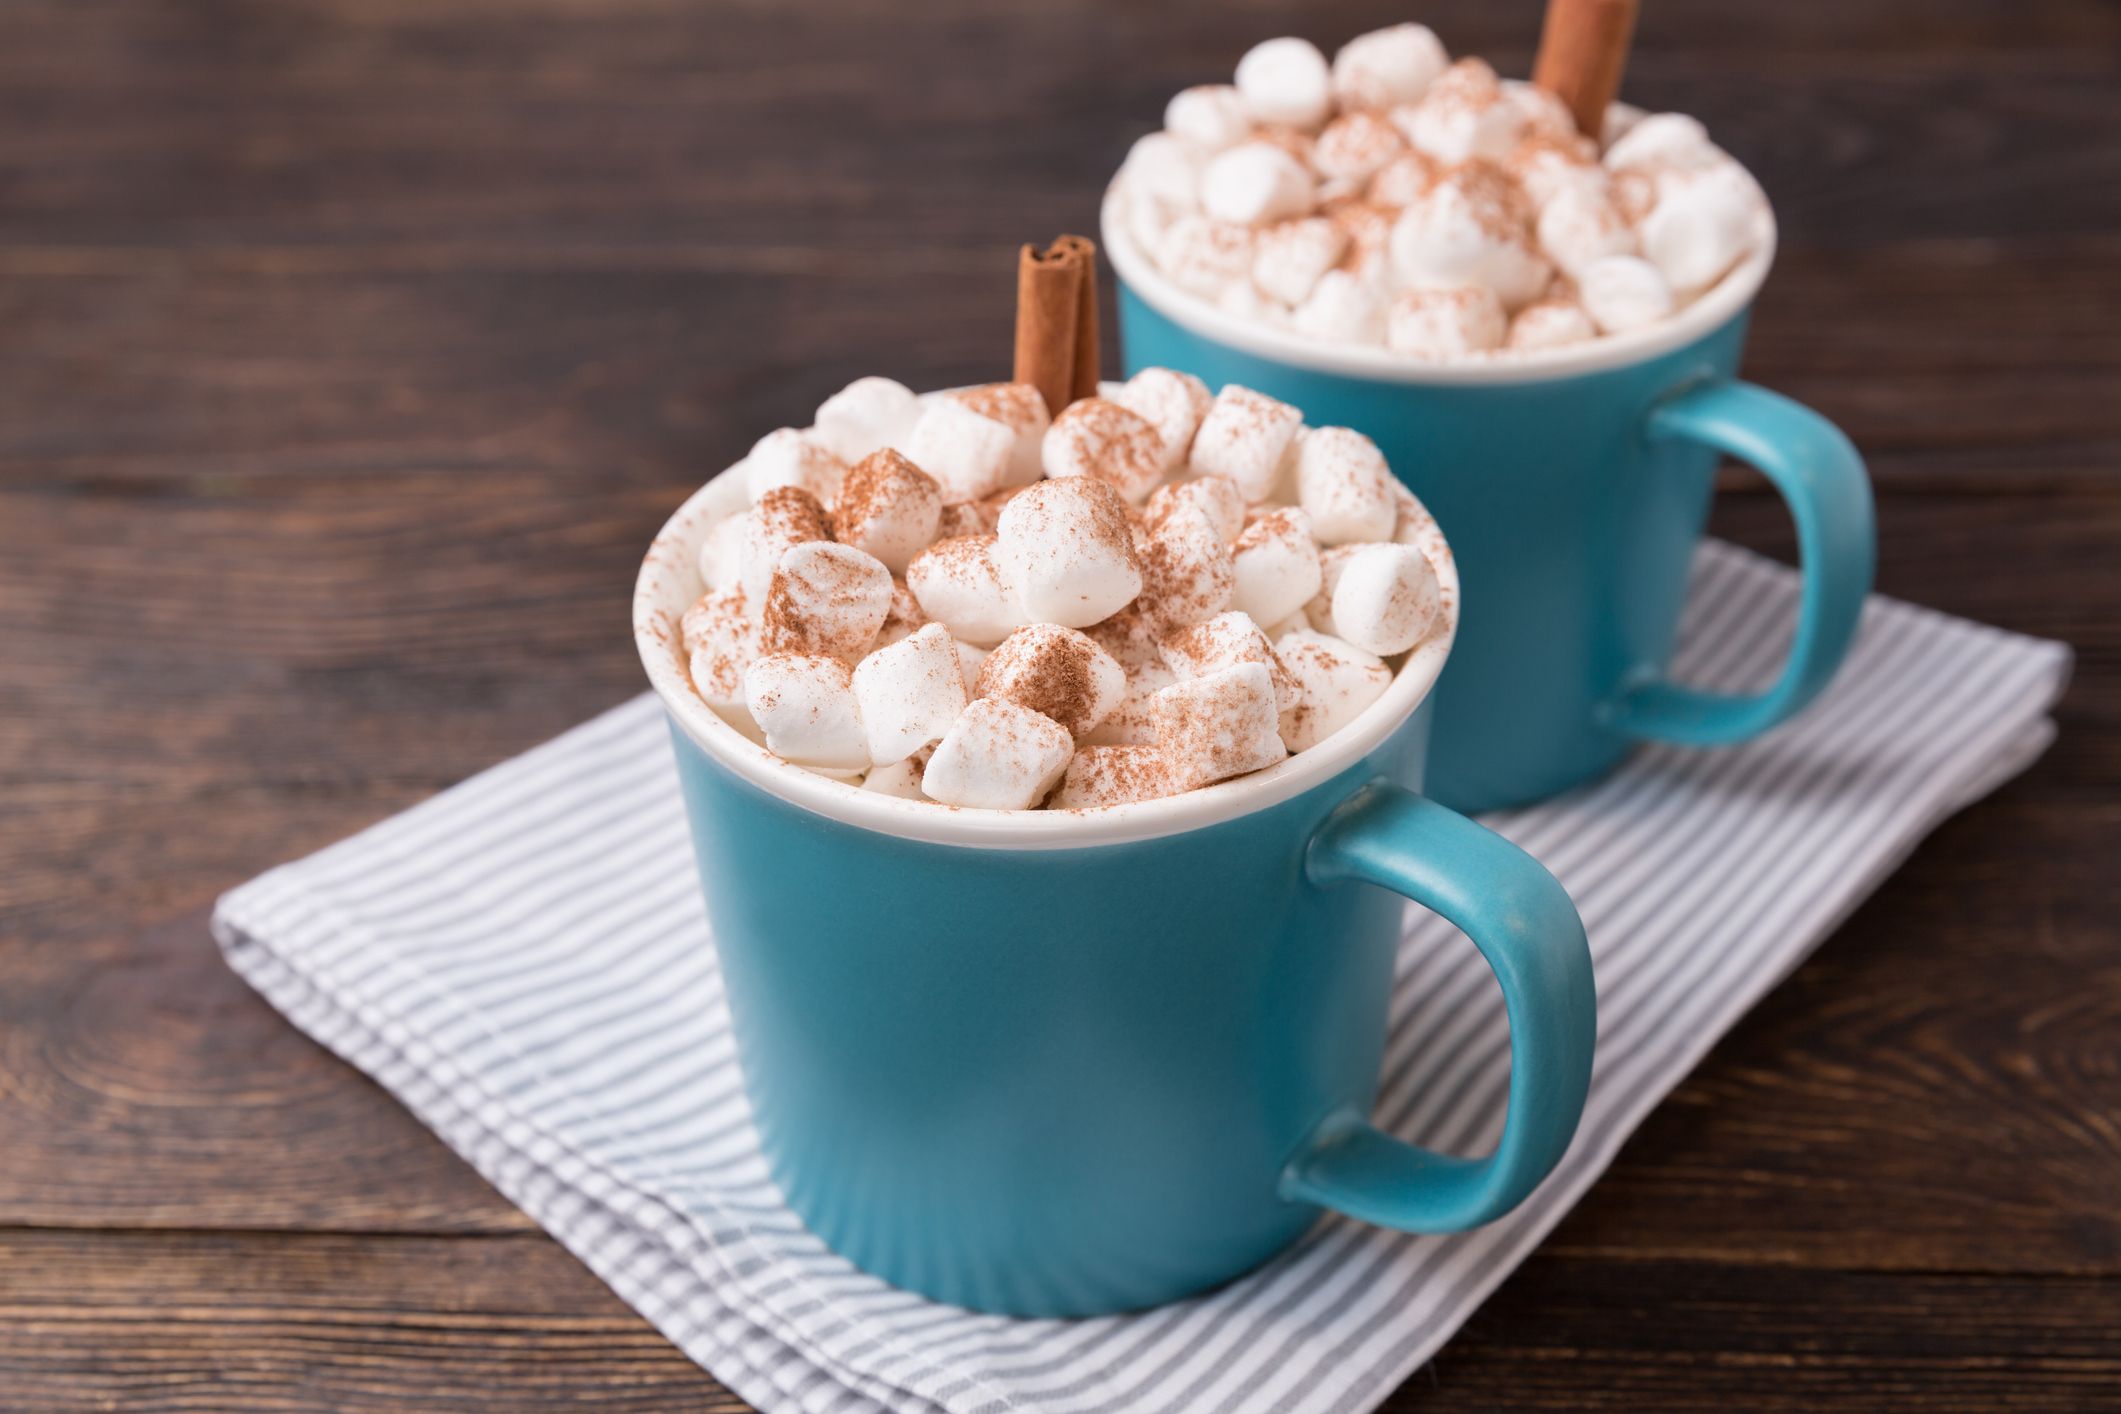 https://hips.hearstapps.com/hmg-prod/images/cocoa-with-marshmallows-on-brown-wooden-background-royalty-free-image-1678127816.jpg